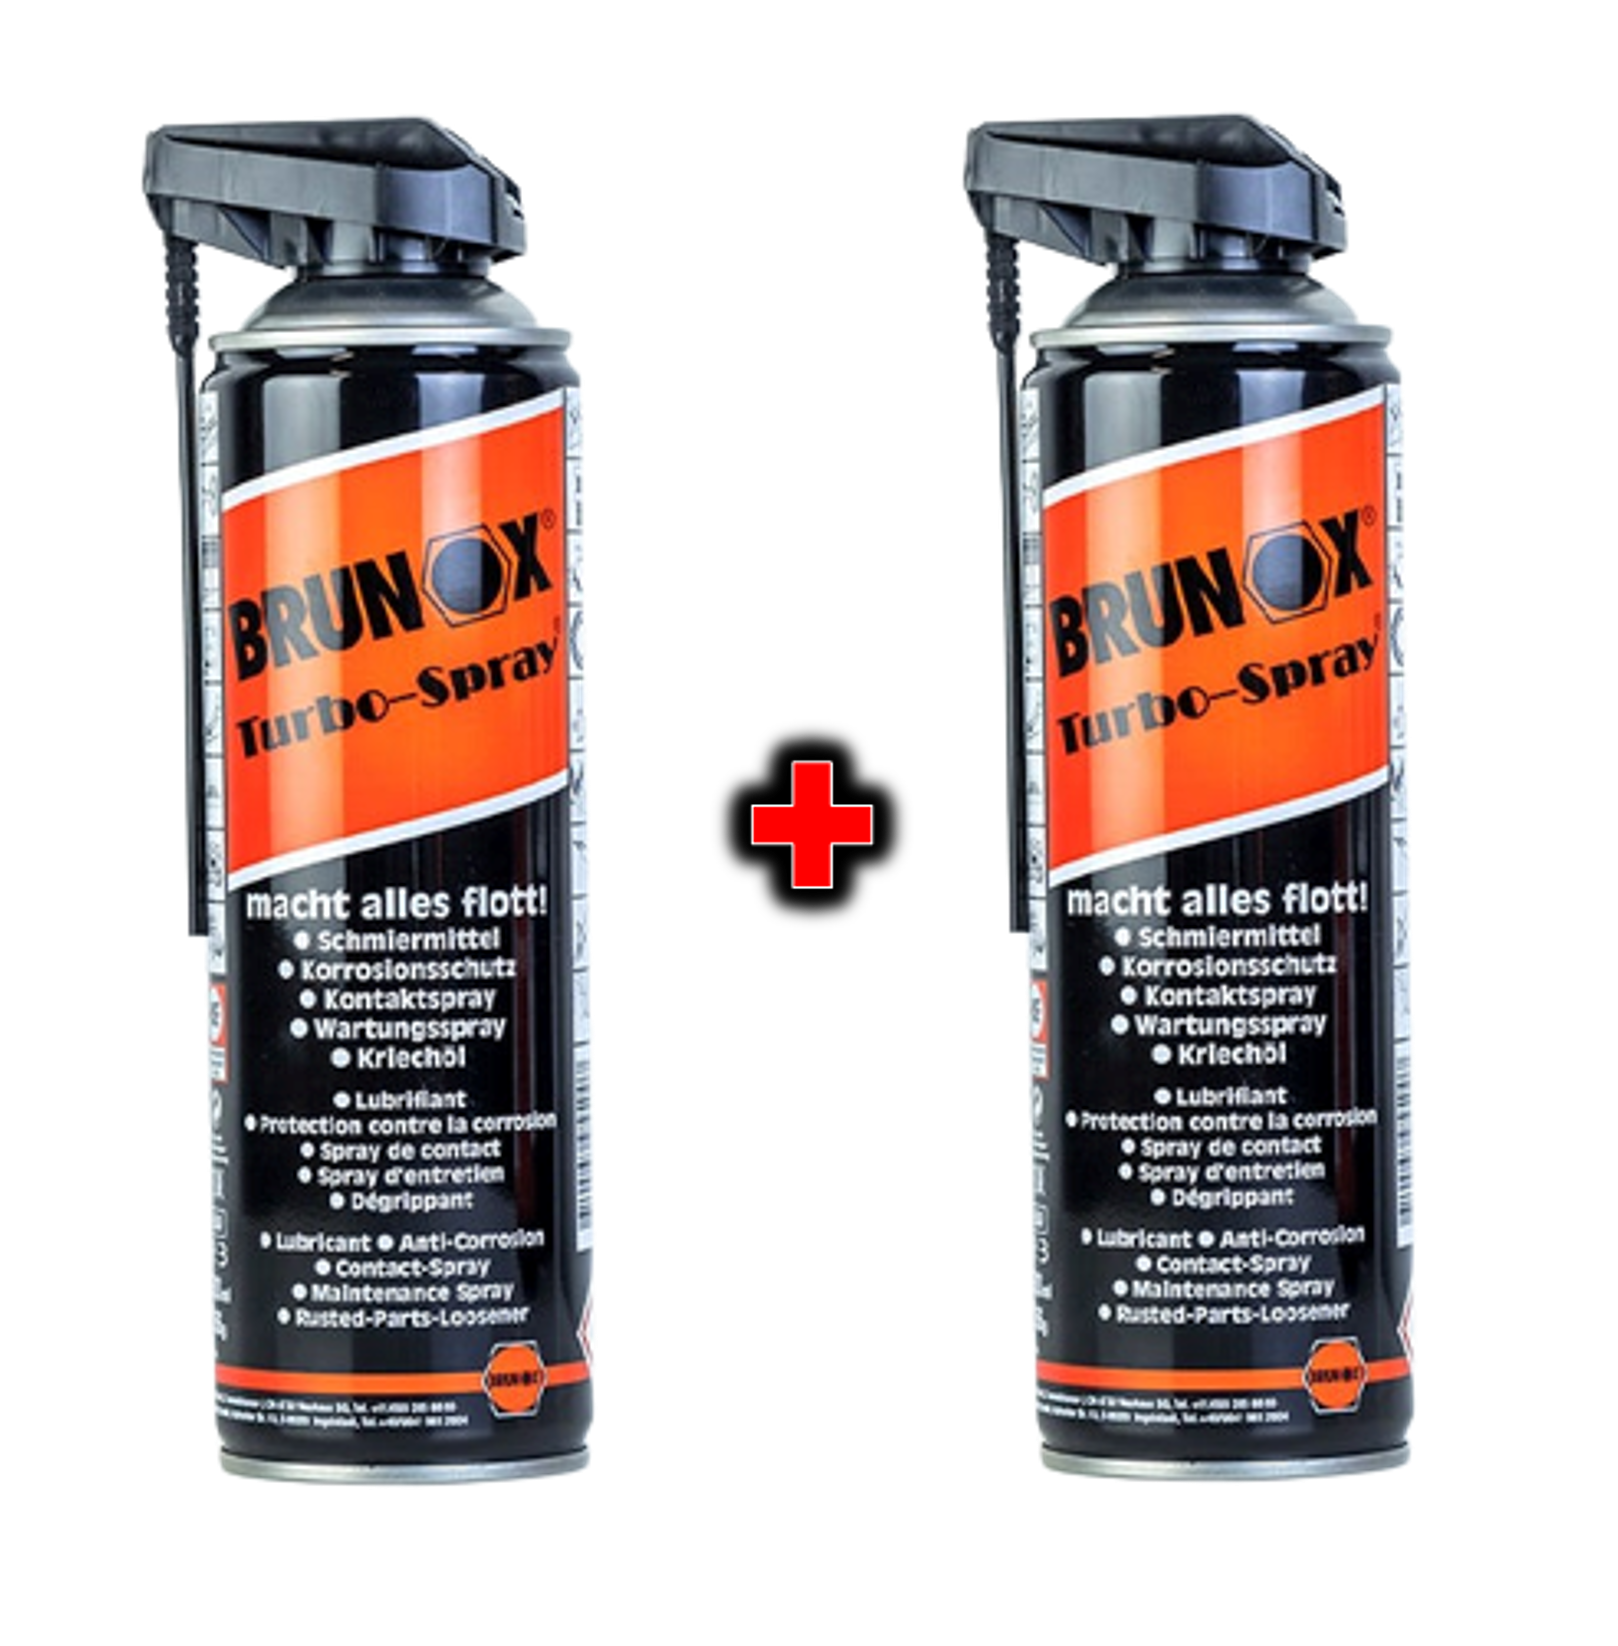 BRUNOX Rust neutralizer and primer applied by brush Epoxy 100ml